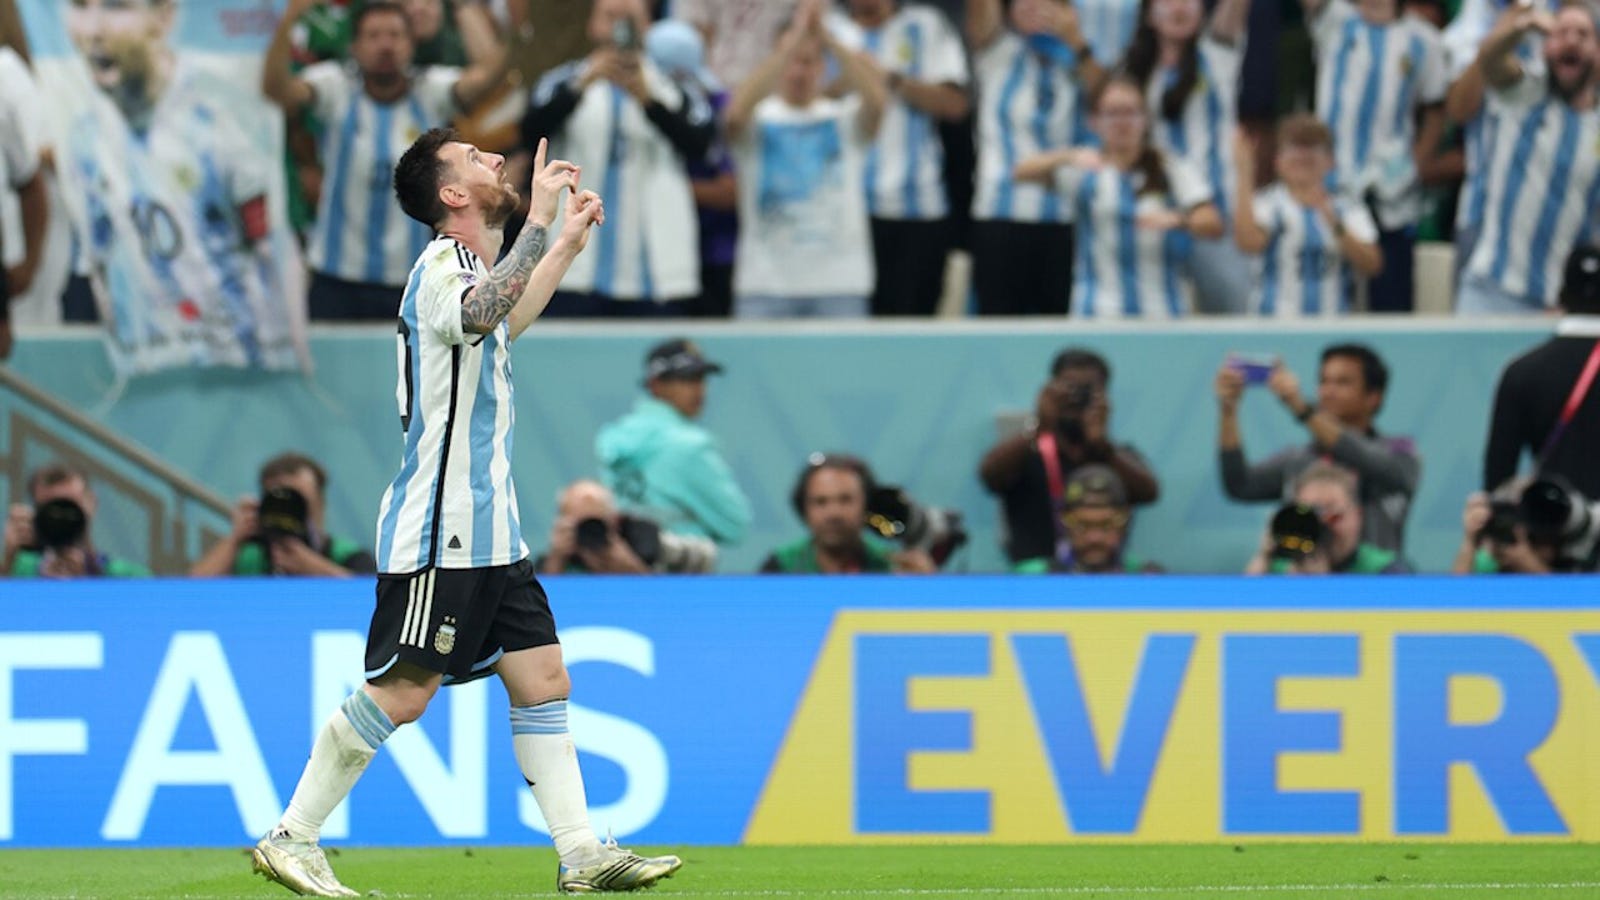 Argentina's Lionel Messi scored against Mexico in the 64'